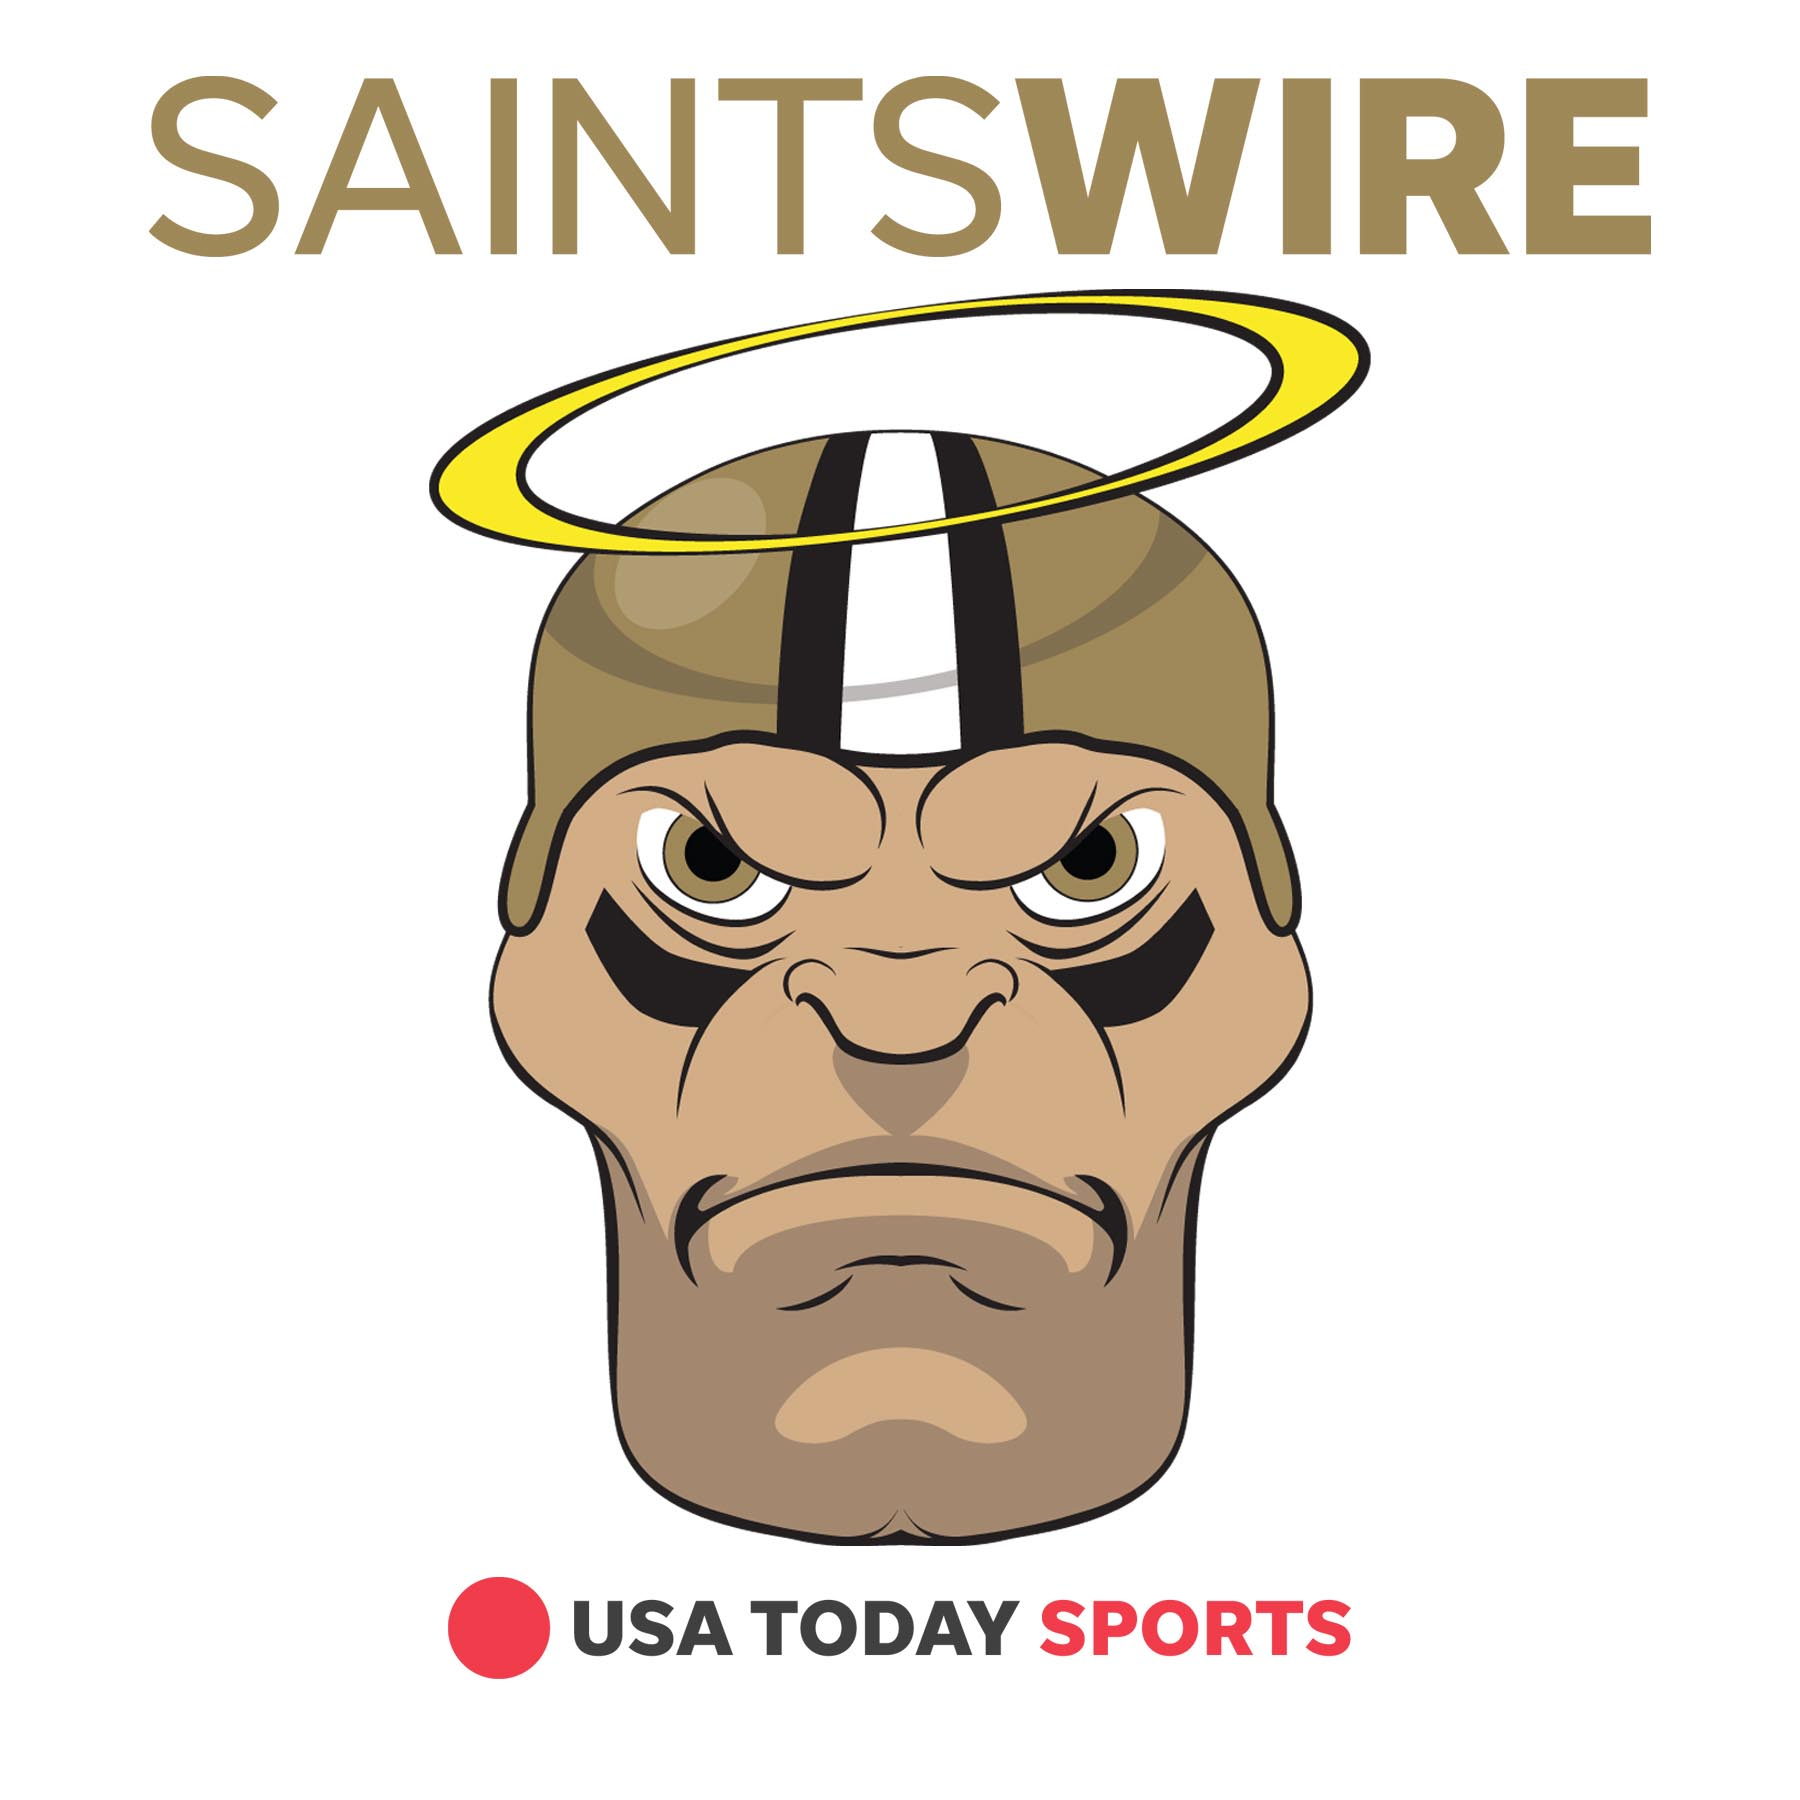 Soft schedule, healthy roster leave Saints with zero excuses for lackluster start